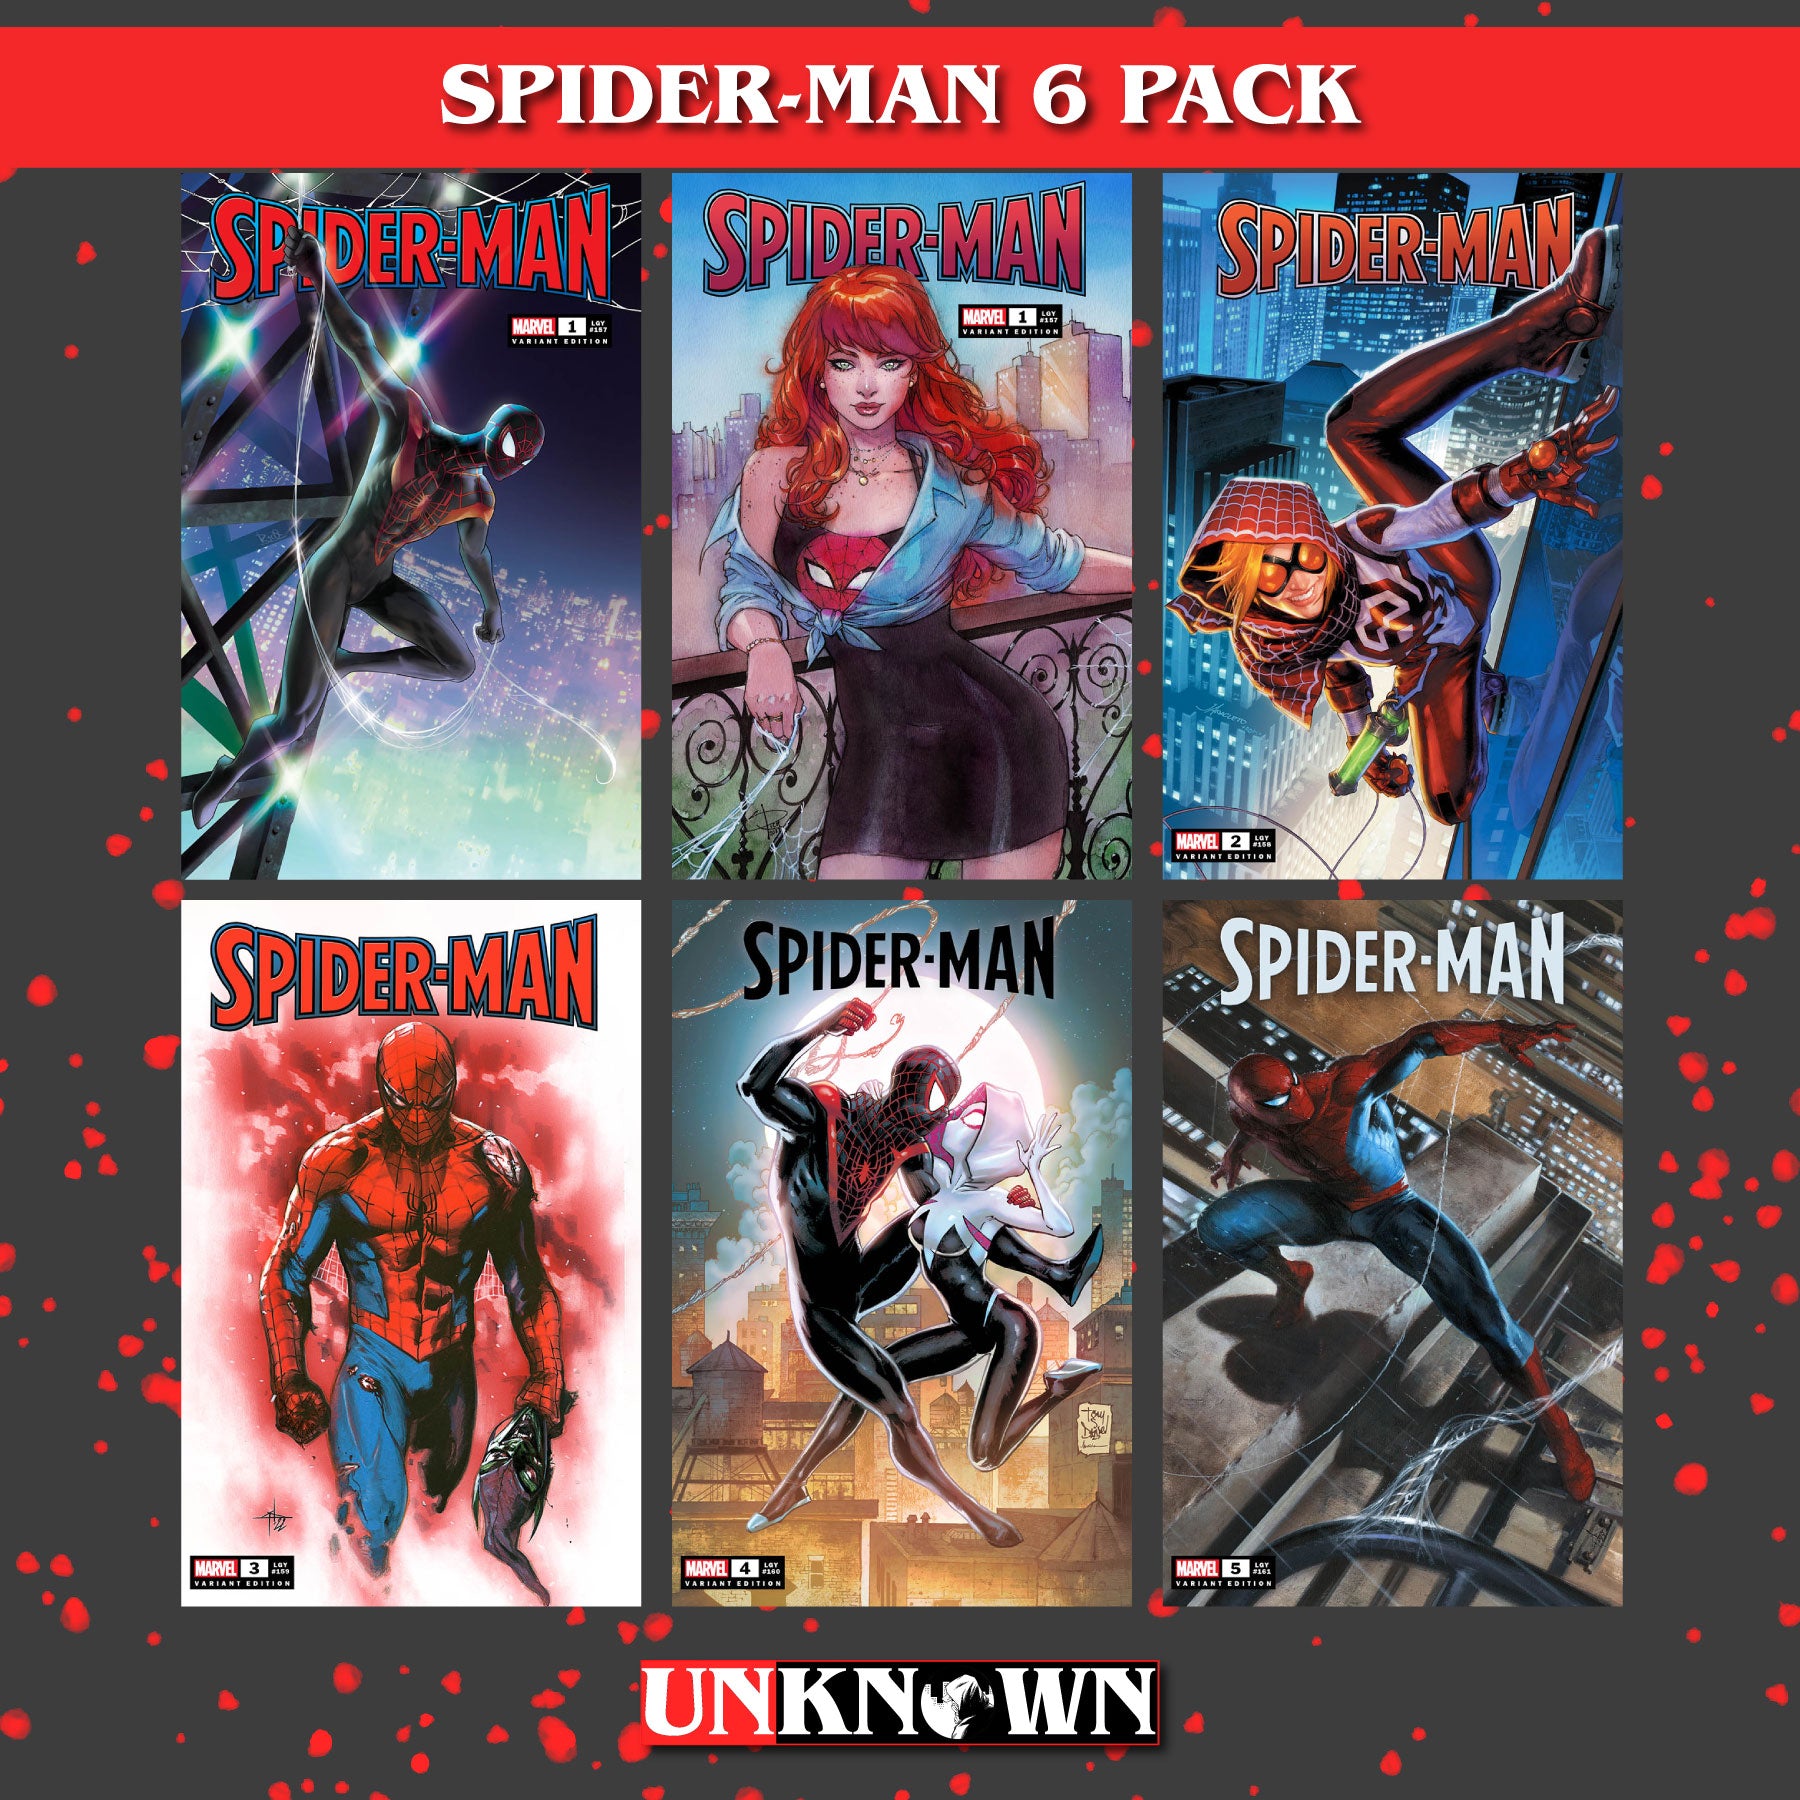 [6 PACK TRADE] SPIDER-MAN #1-5 UNKNOWN COMICS EXCLUSIVE VAR (02/15/2023)